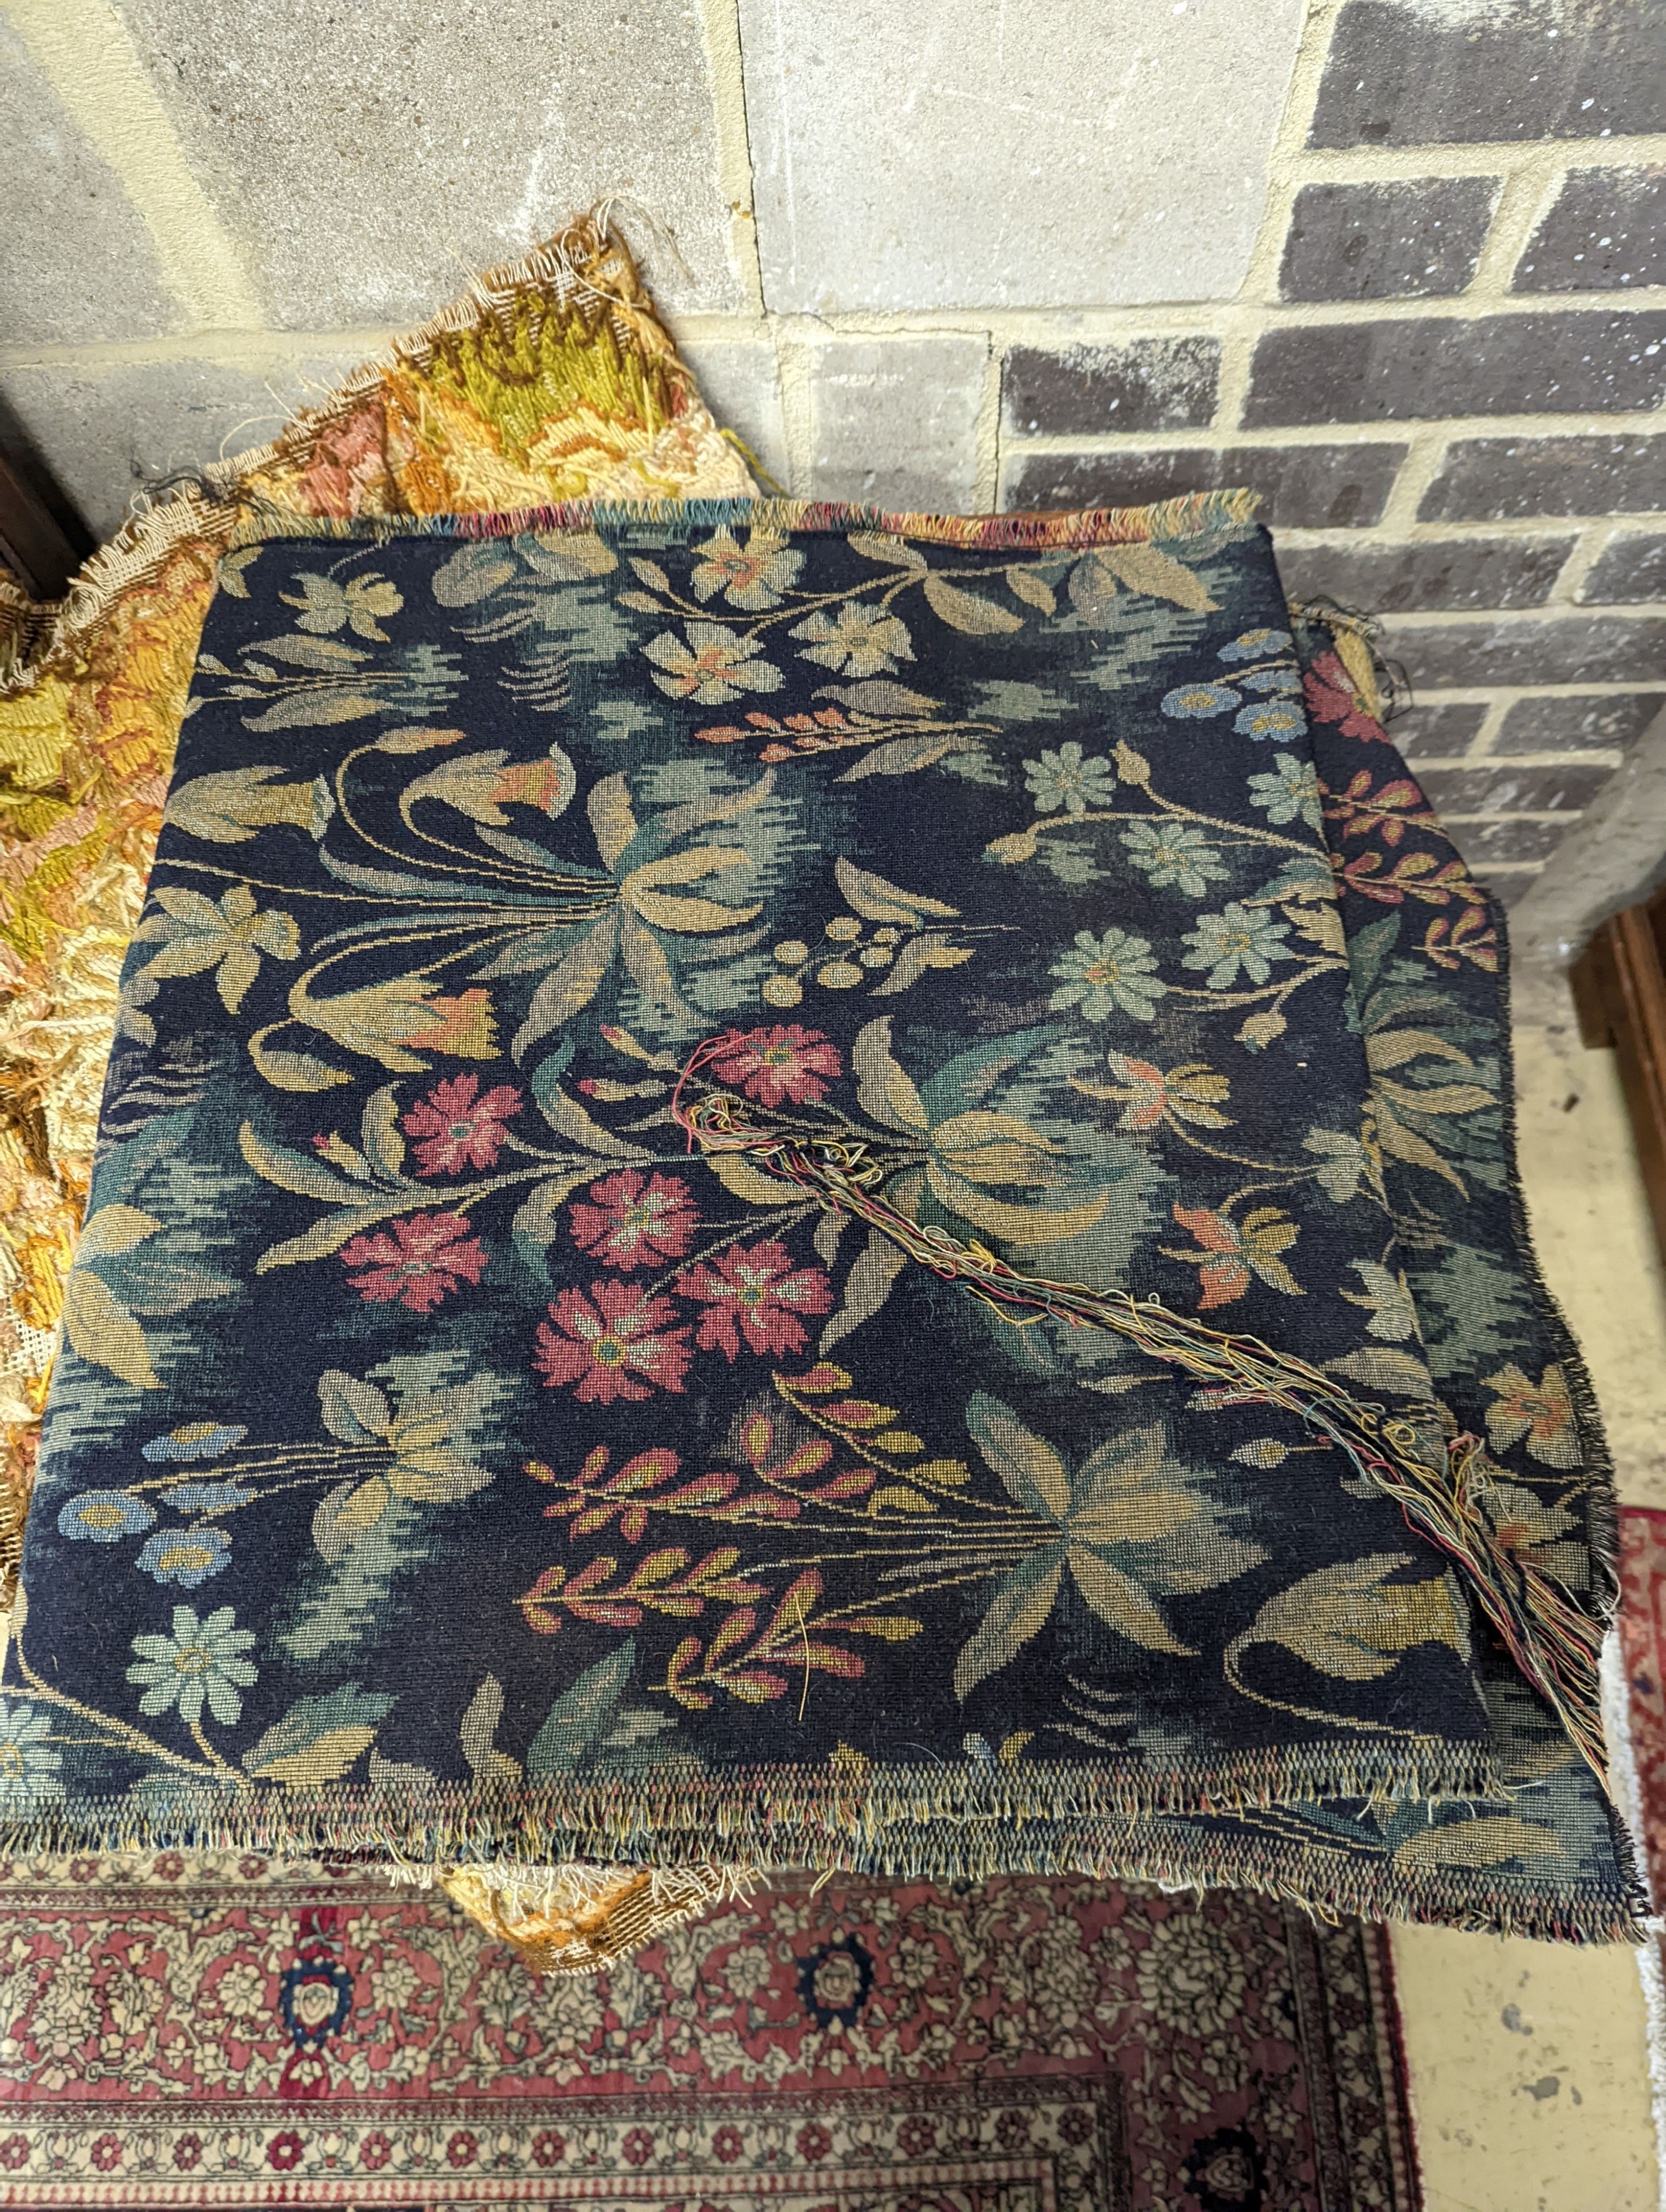 A length of machine tapestry fabric with flowers on a black ground, 420 x 52cm together with a Caucasian rug faced cushion and an antique English needlework panel with stylised scrolls 175 x 67cm